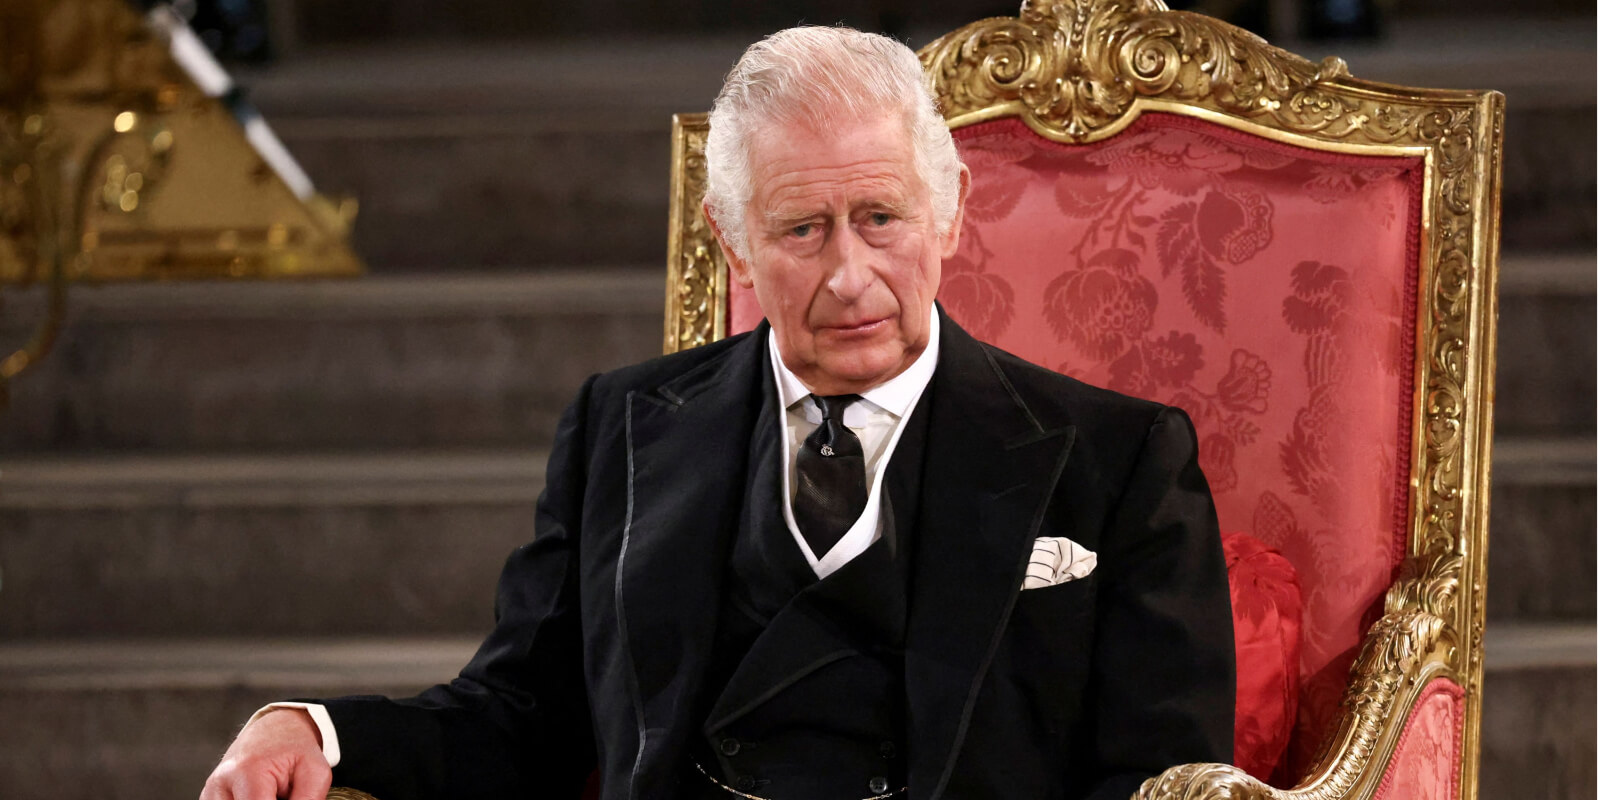 King Charles photographed in Westminster Hall, inside the Palace of Westminster, central London on September 12, 2022.